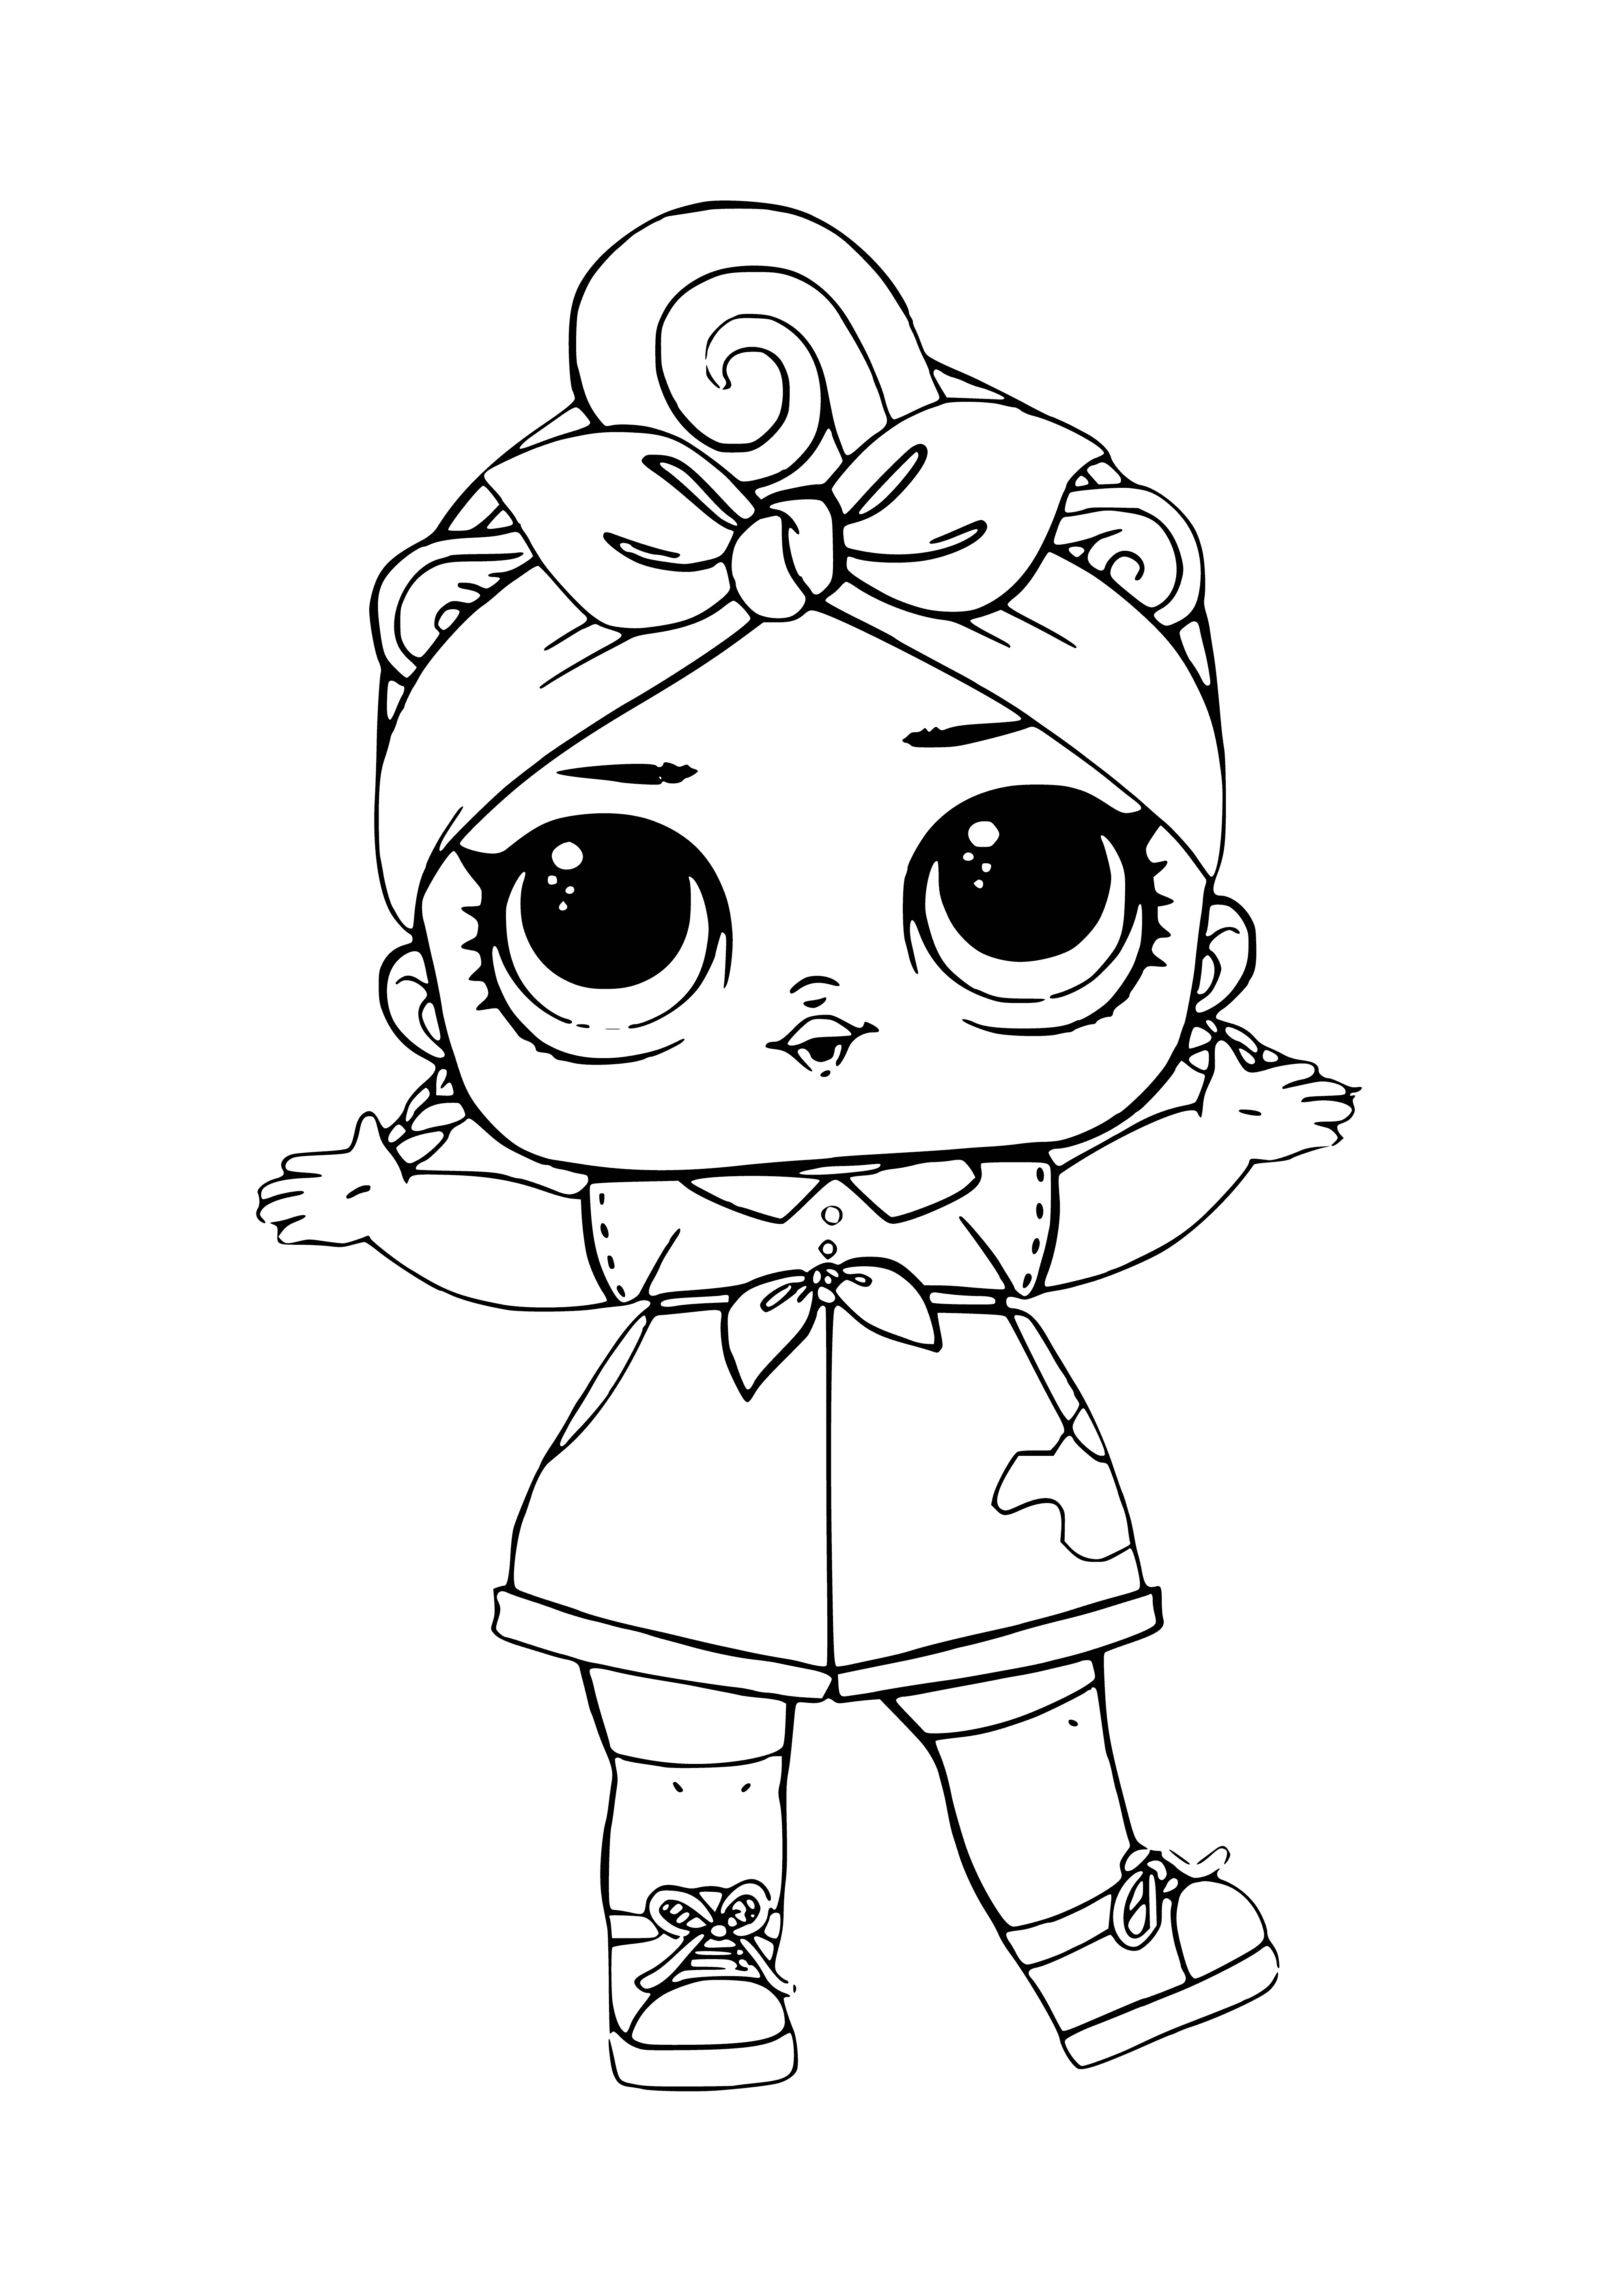 LOL Can Do Baby confetti pop (Worker) coloring page